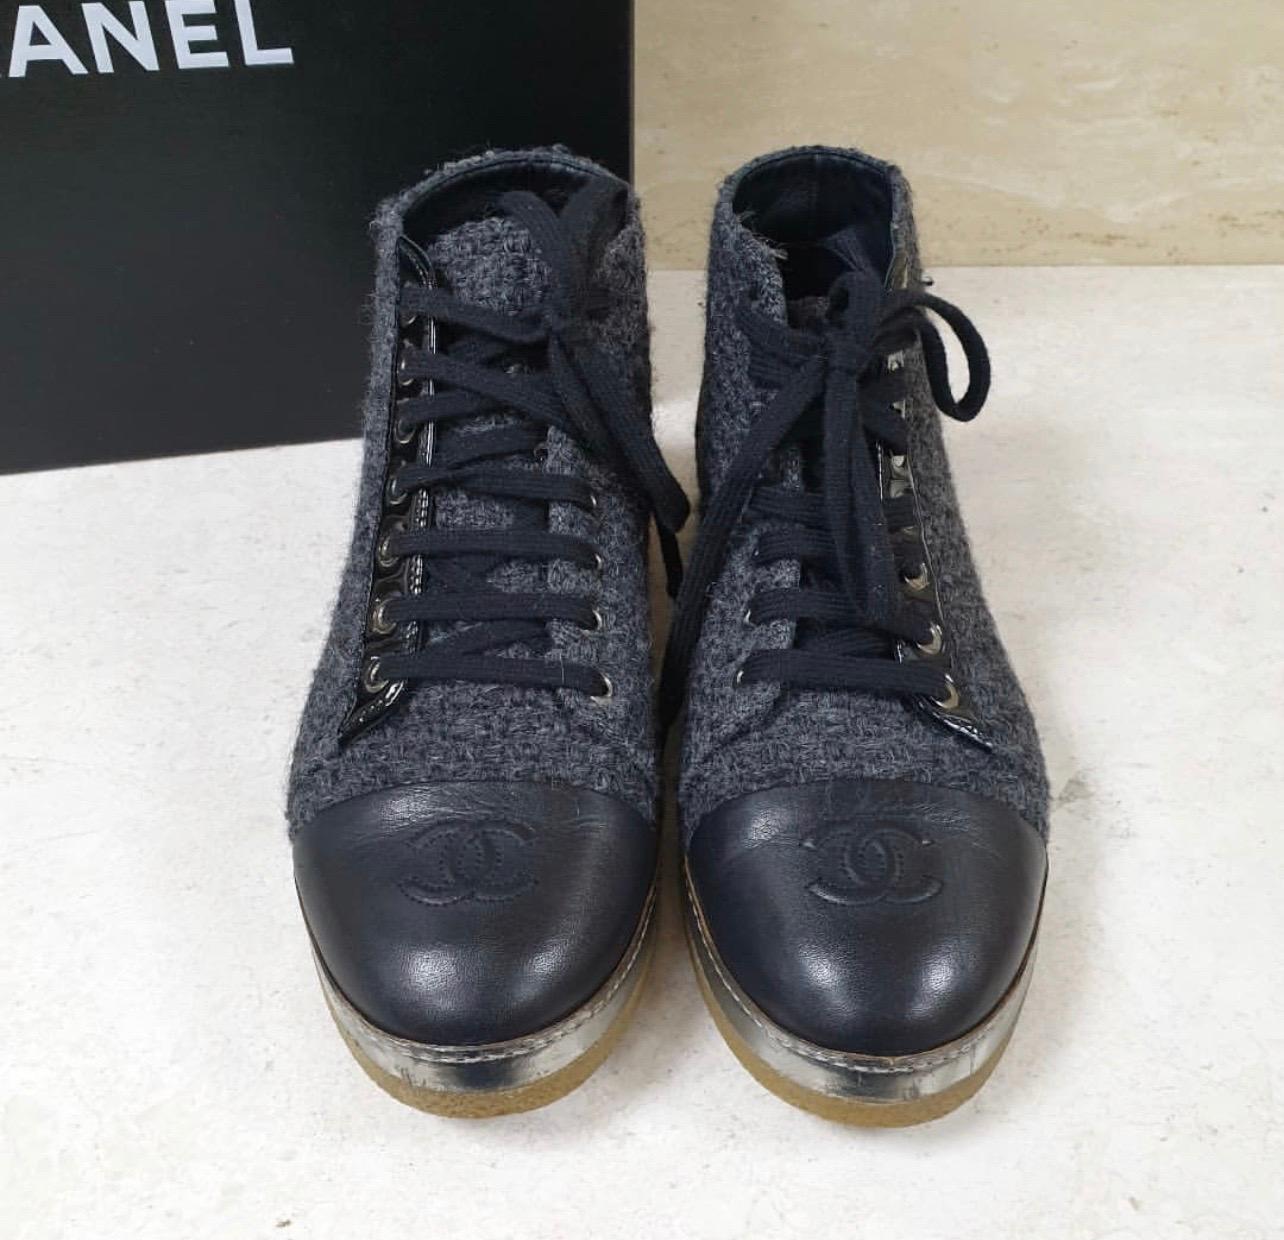 A blend of style and bold simplicity, these ankle boots from Chanel will sweetly complement your casual as well as evening ensemble. 
Crafted with a grey wool blend, the boots have leather cap toes carrying the CC stitch details and lace-ups at the